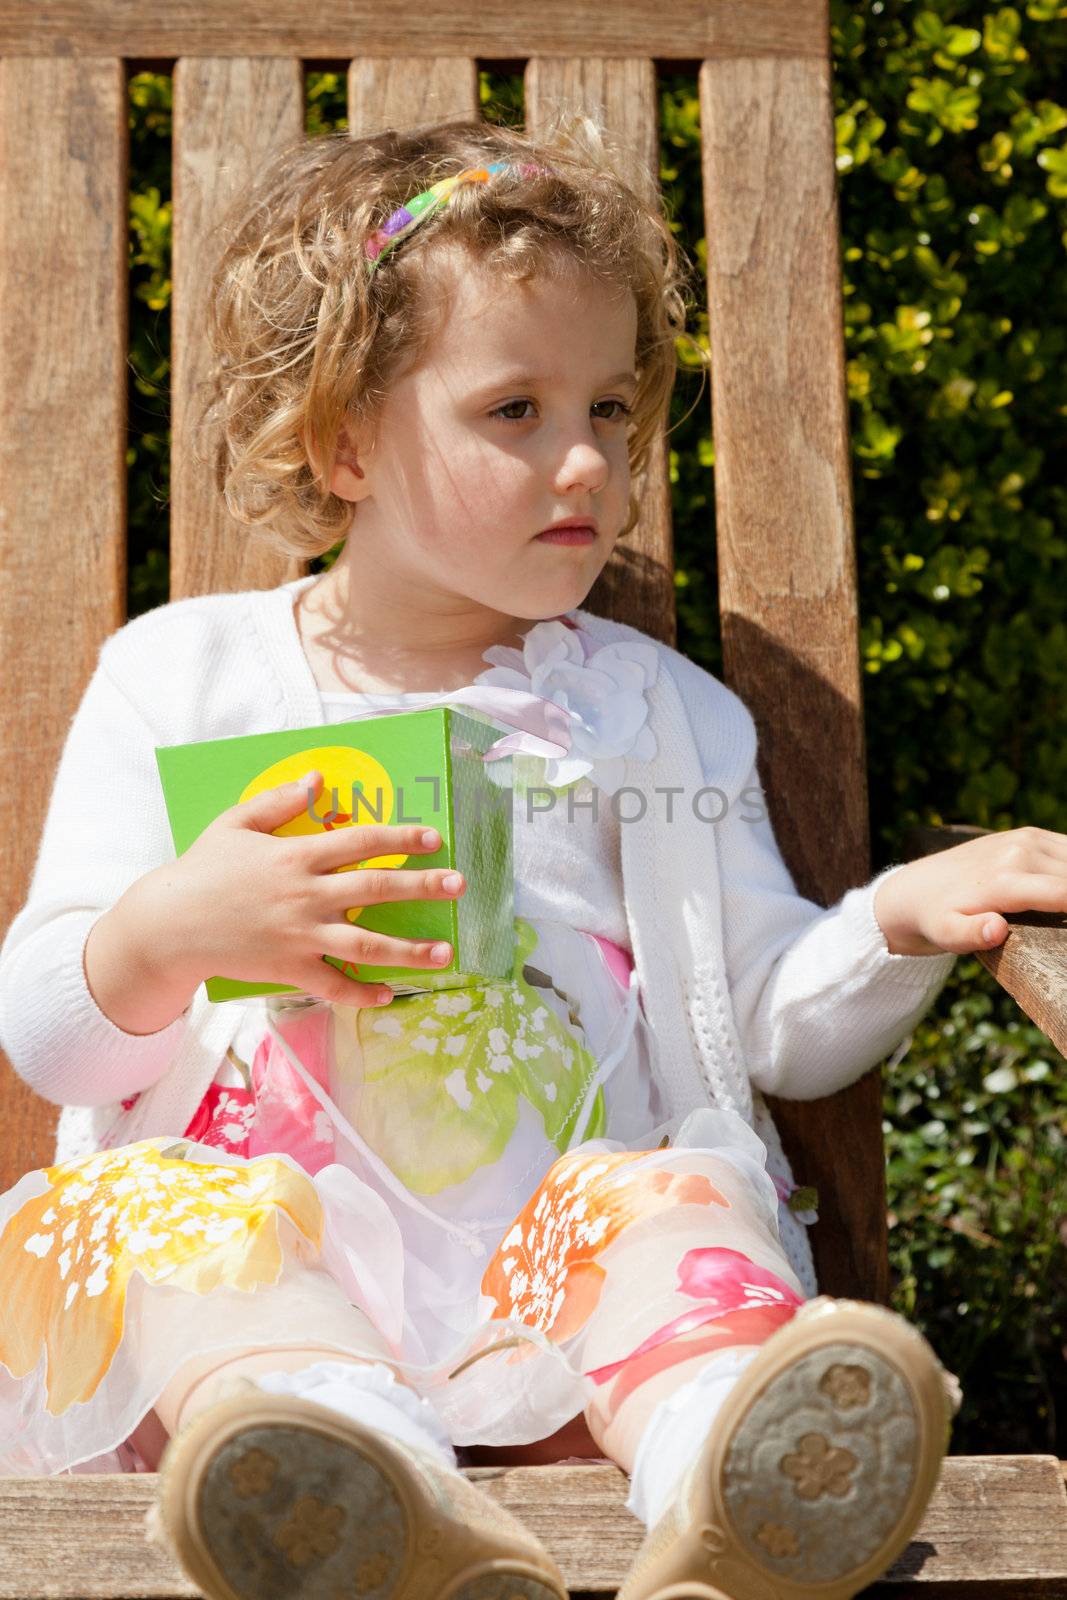 Egg hunt is a game during which decorated eggs, real hard-boiled ones or artificial, filled with or made of chocolate  candies, of various sizes, are hidden in various places for children to find.